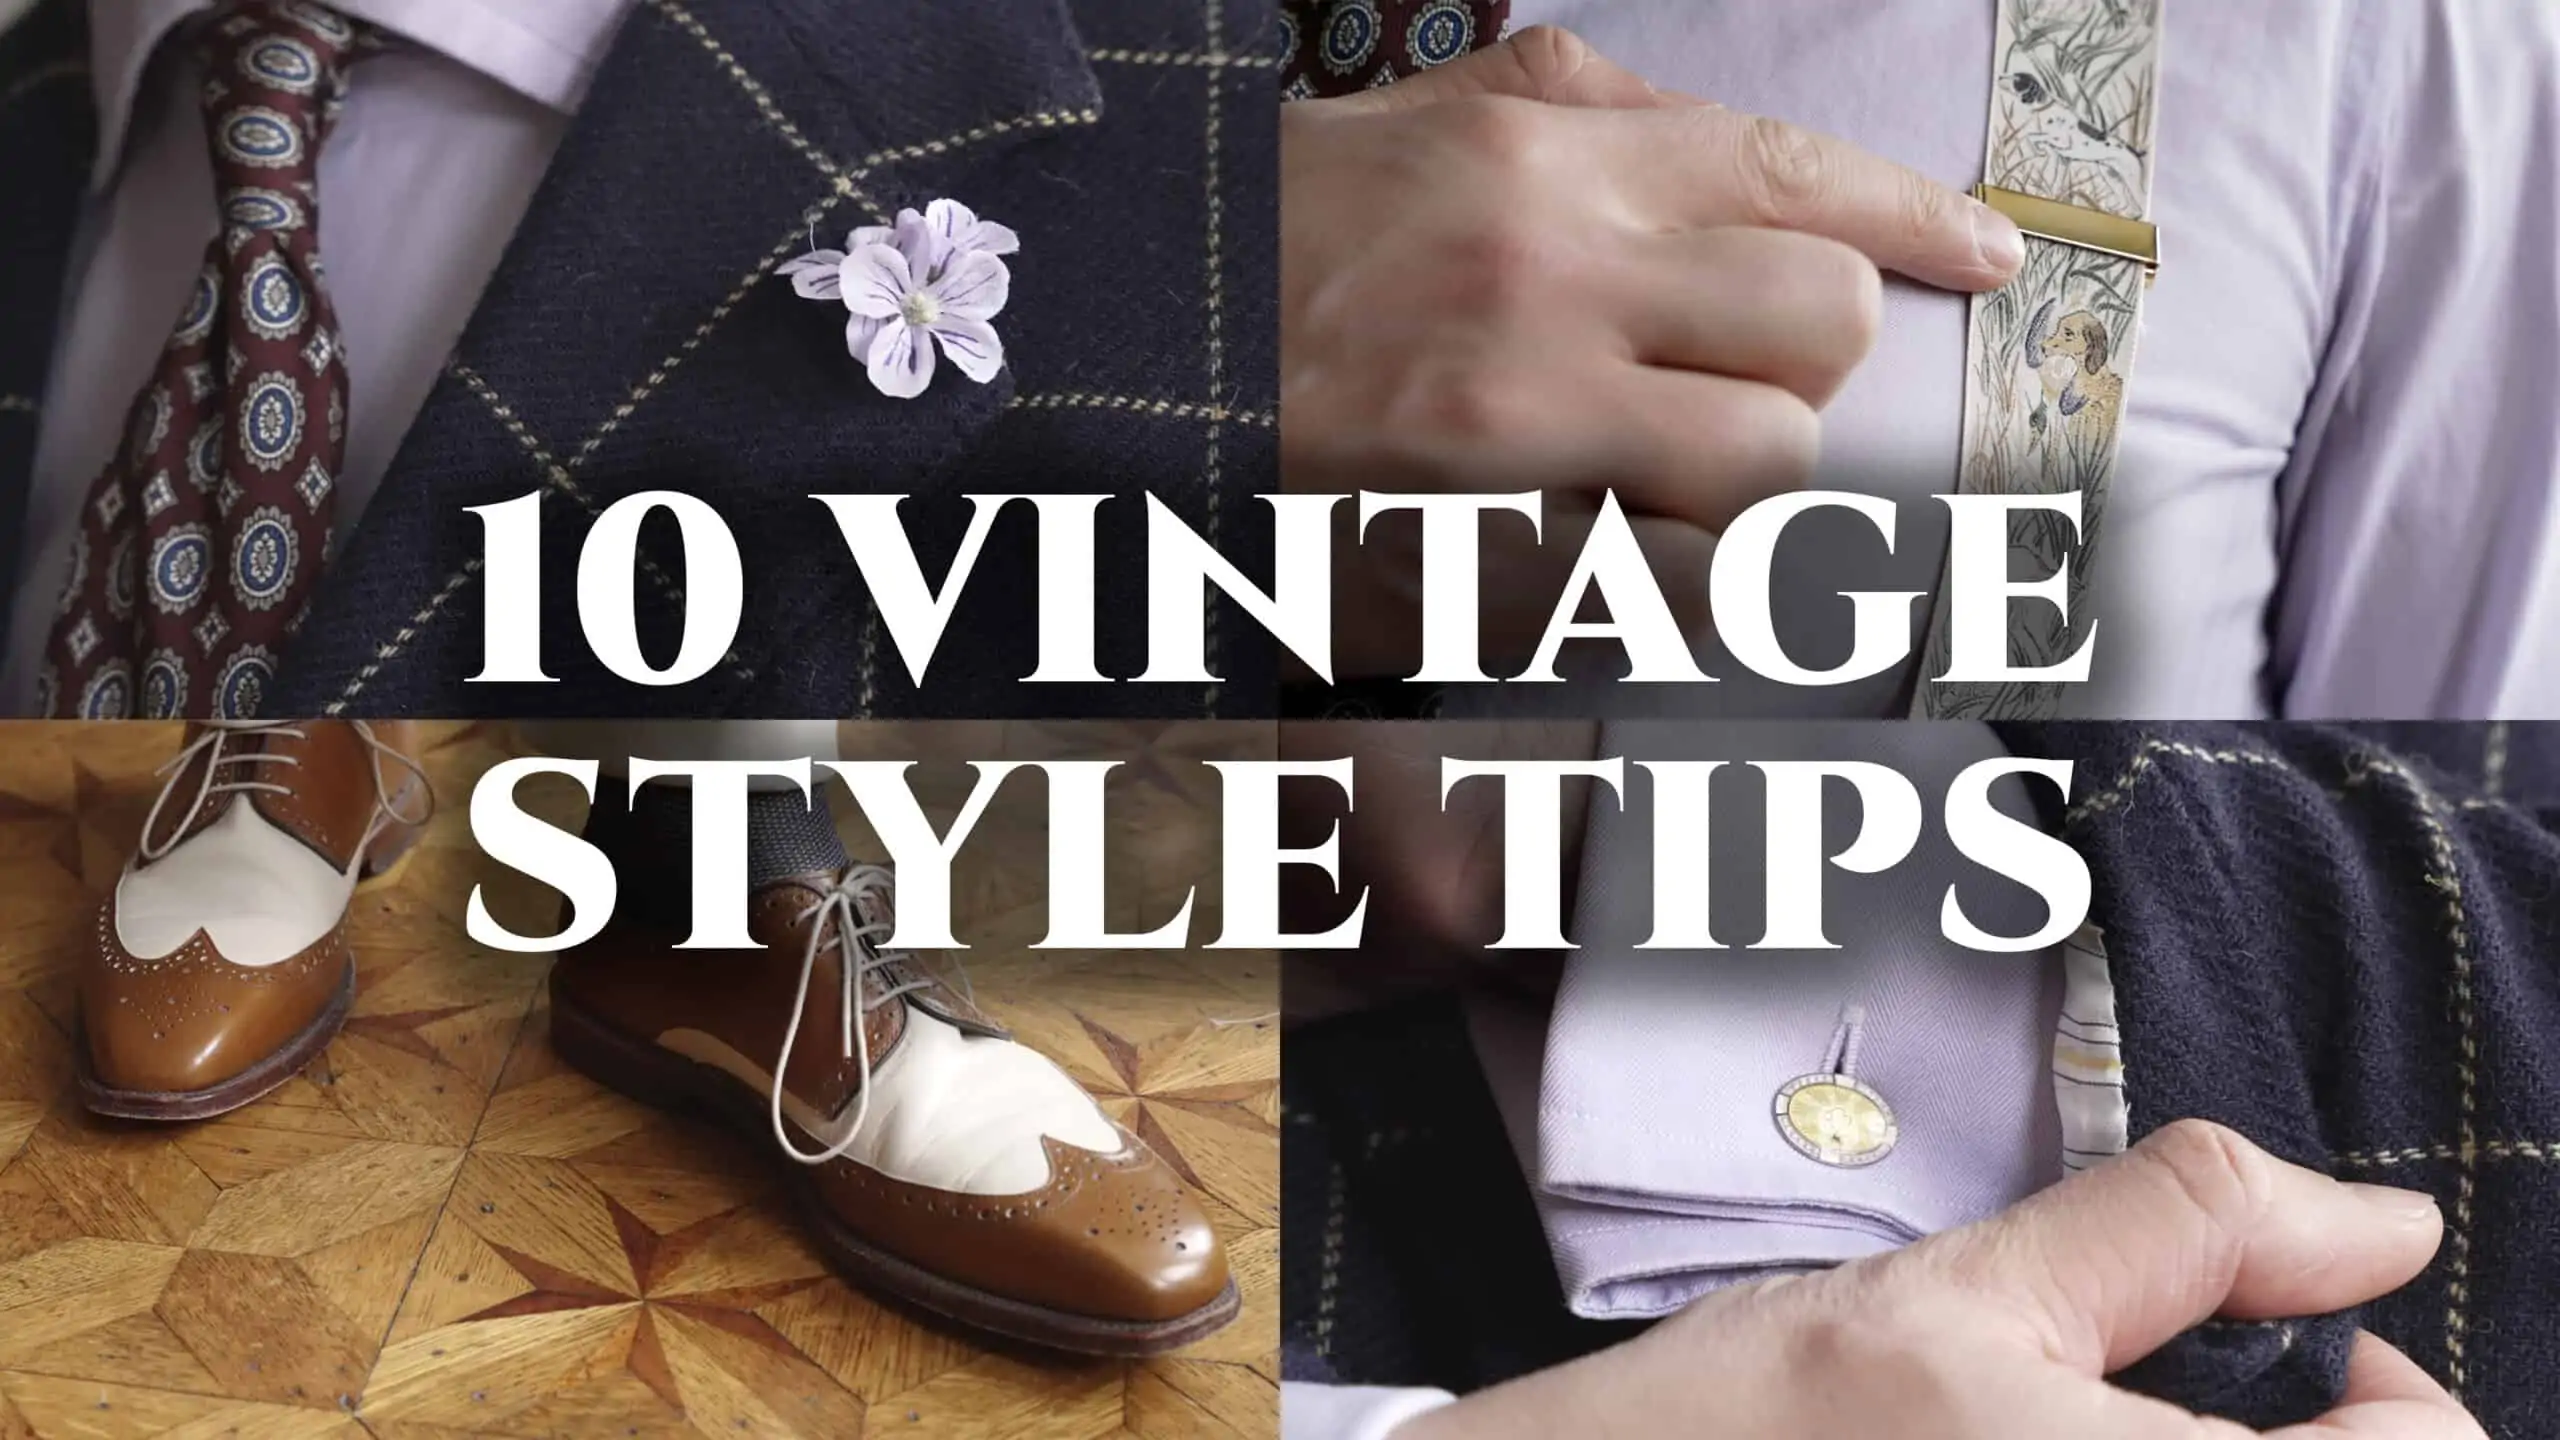 10 vintage style tips 3840x2160 scaled